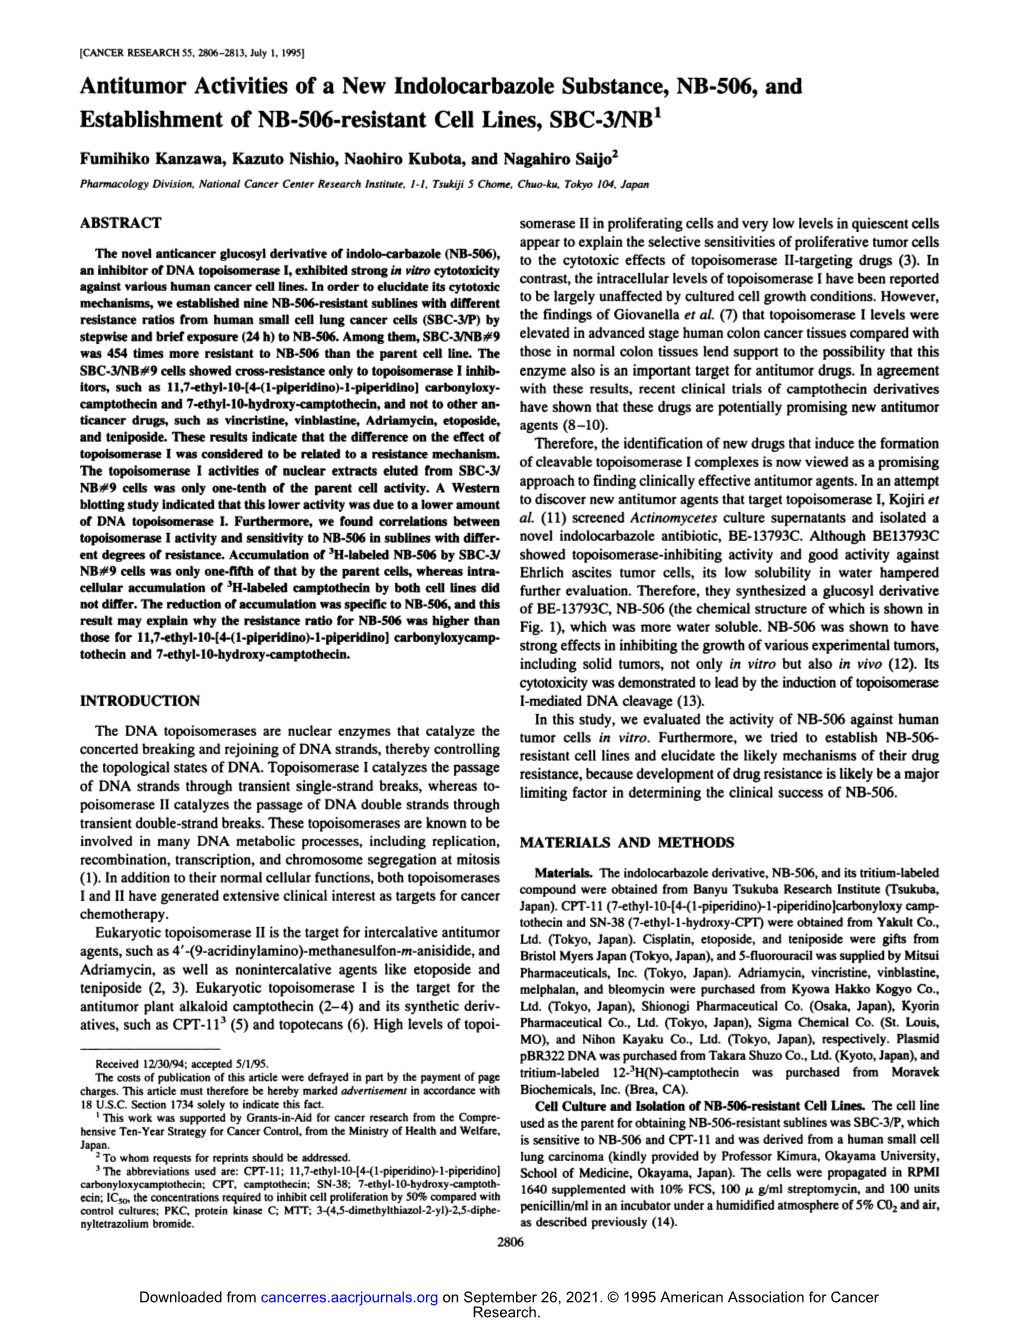 Antitumor Activities of a New Indolocarbazole Substance, NB-506, and Establishment of NB-506-Resistant Cell Lines, SBC-3/NB'